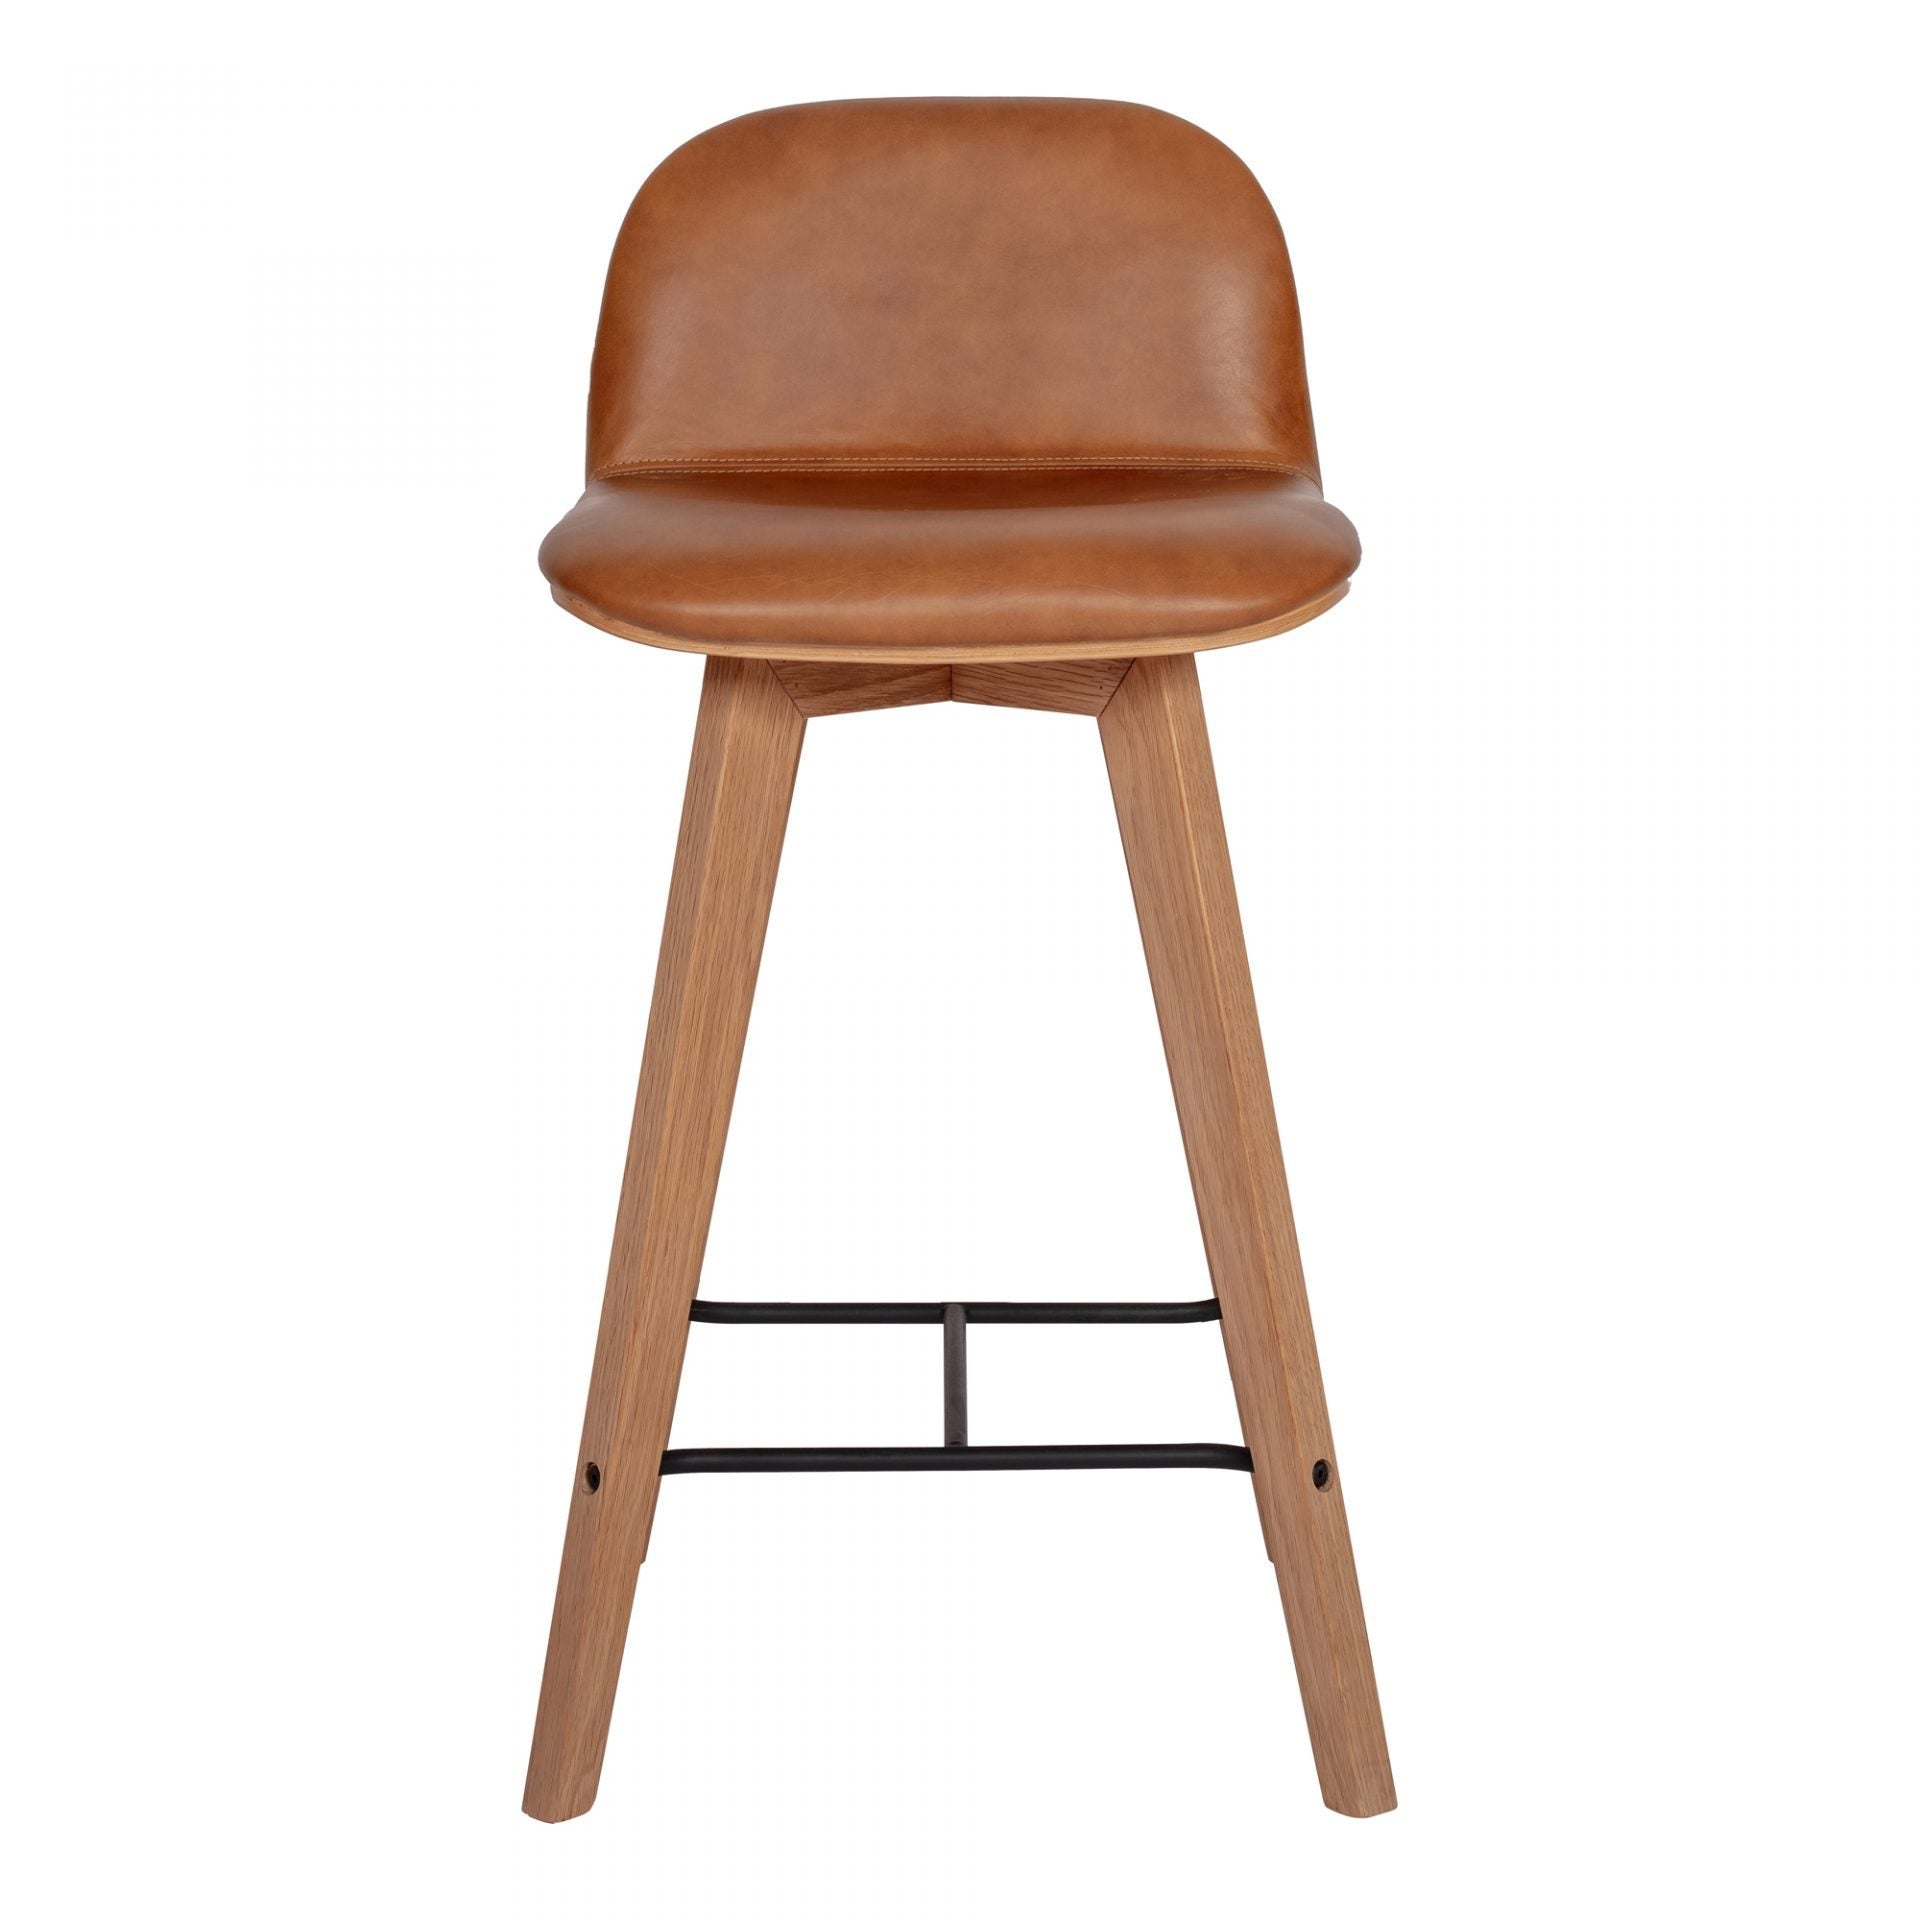 Counter Stool: Stylish Seating at the Counter